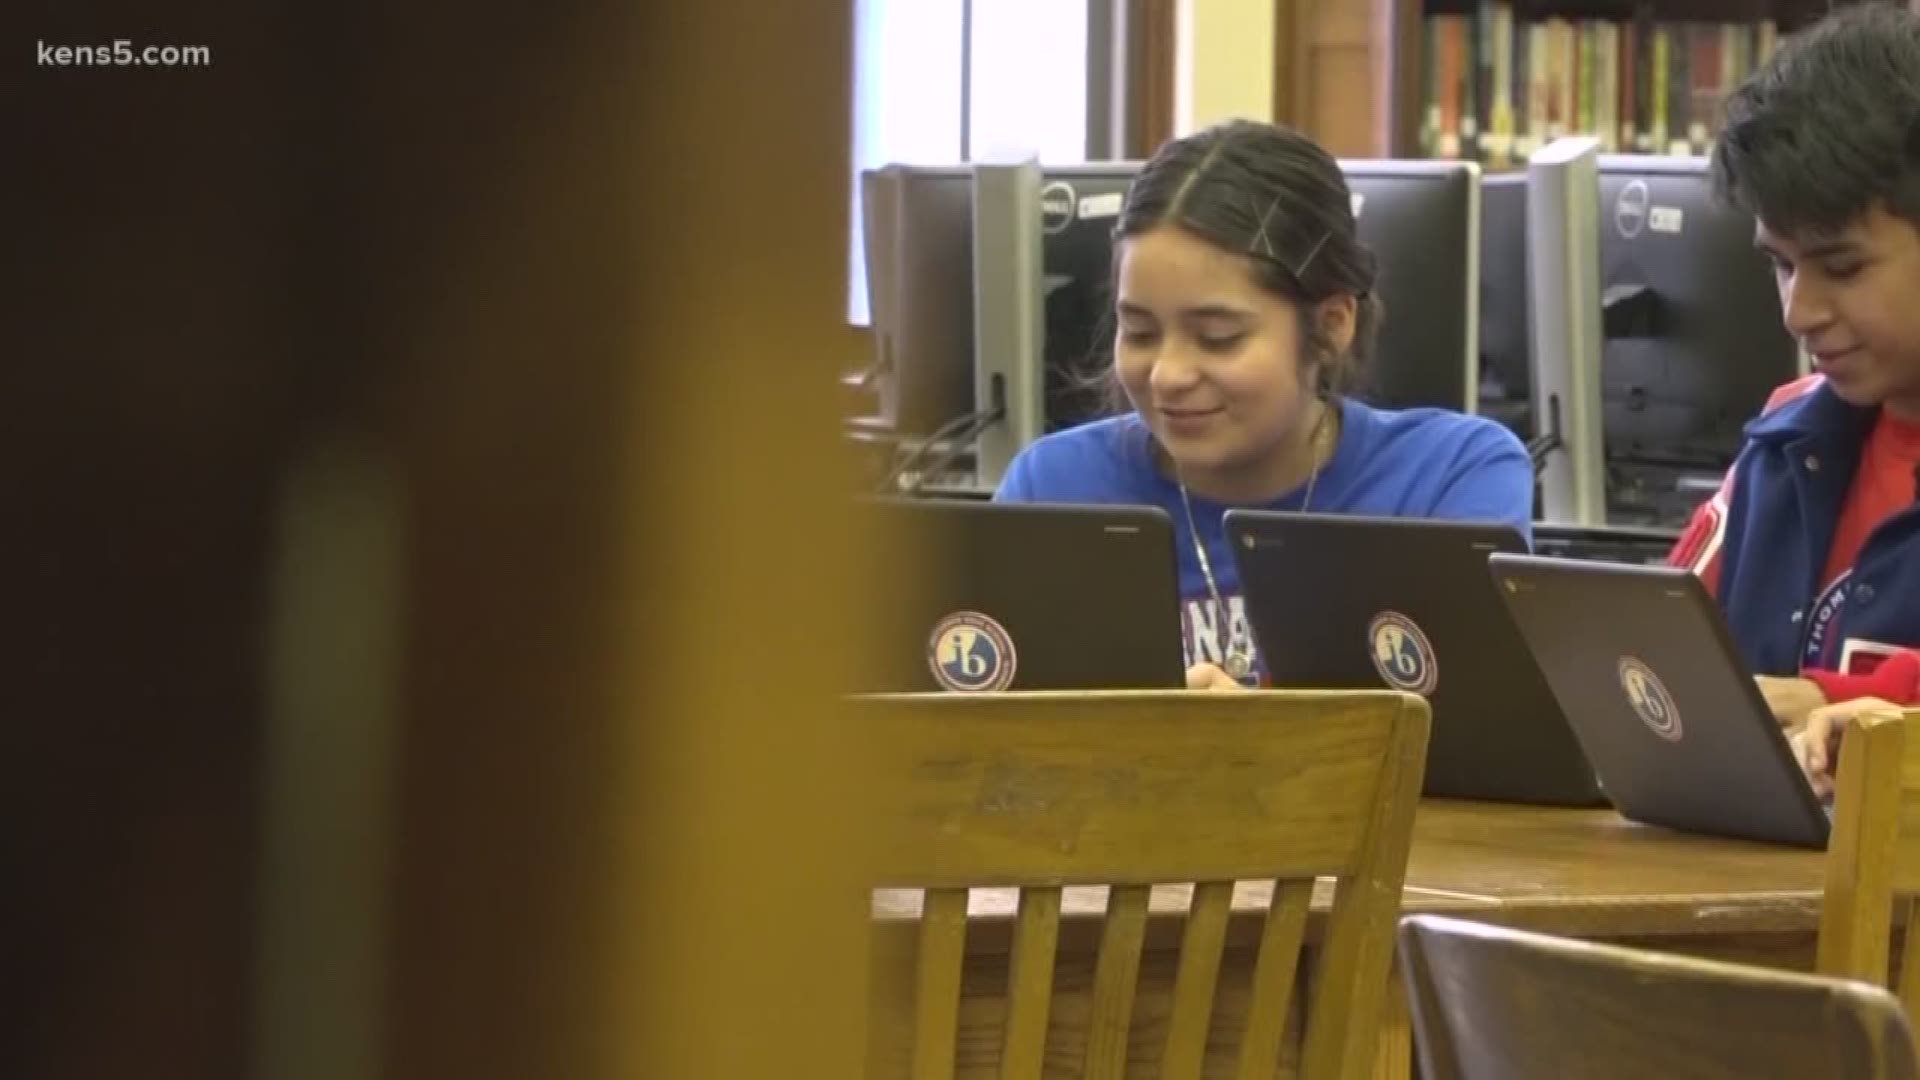 For the international baccalaureates at Jefferson HS studying at a college level, a new resource matches their drive.